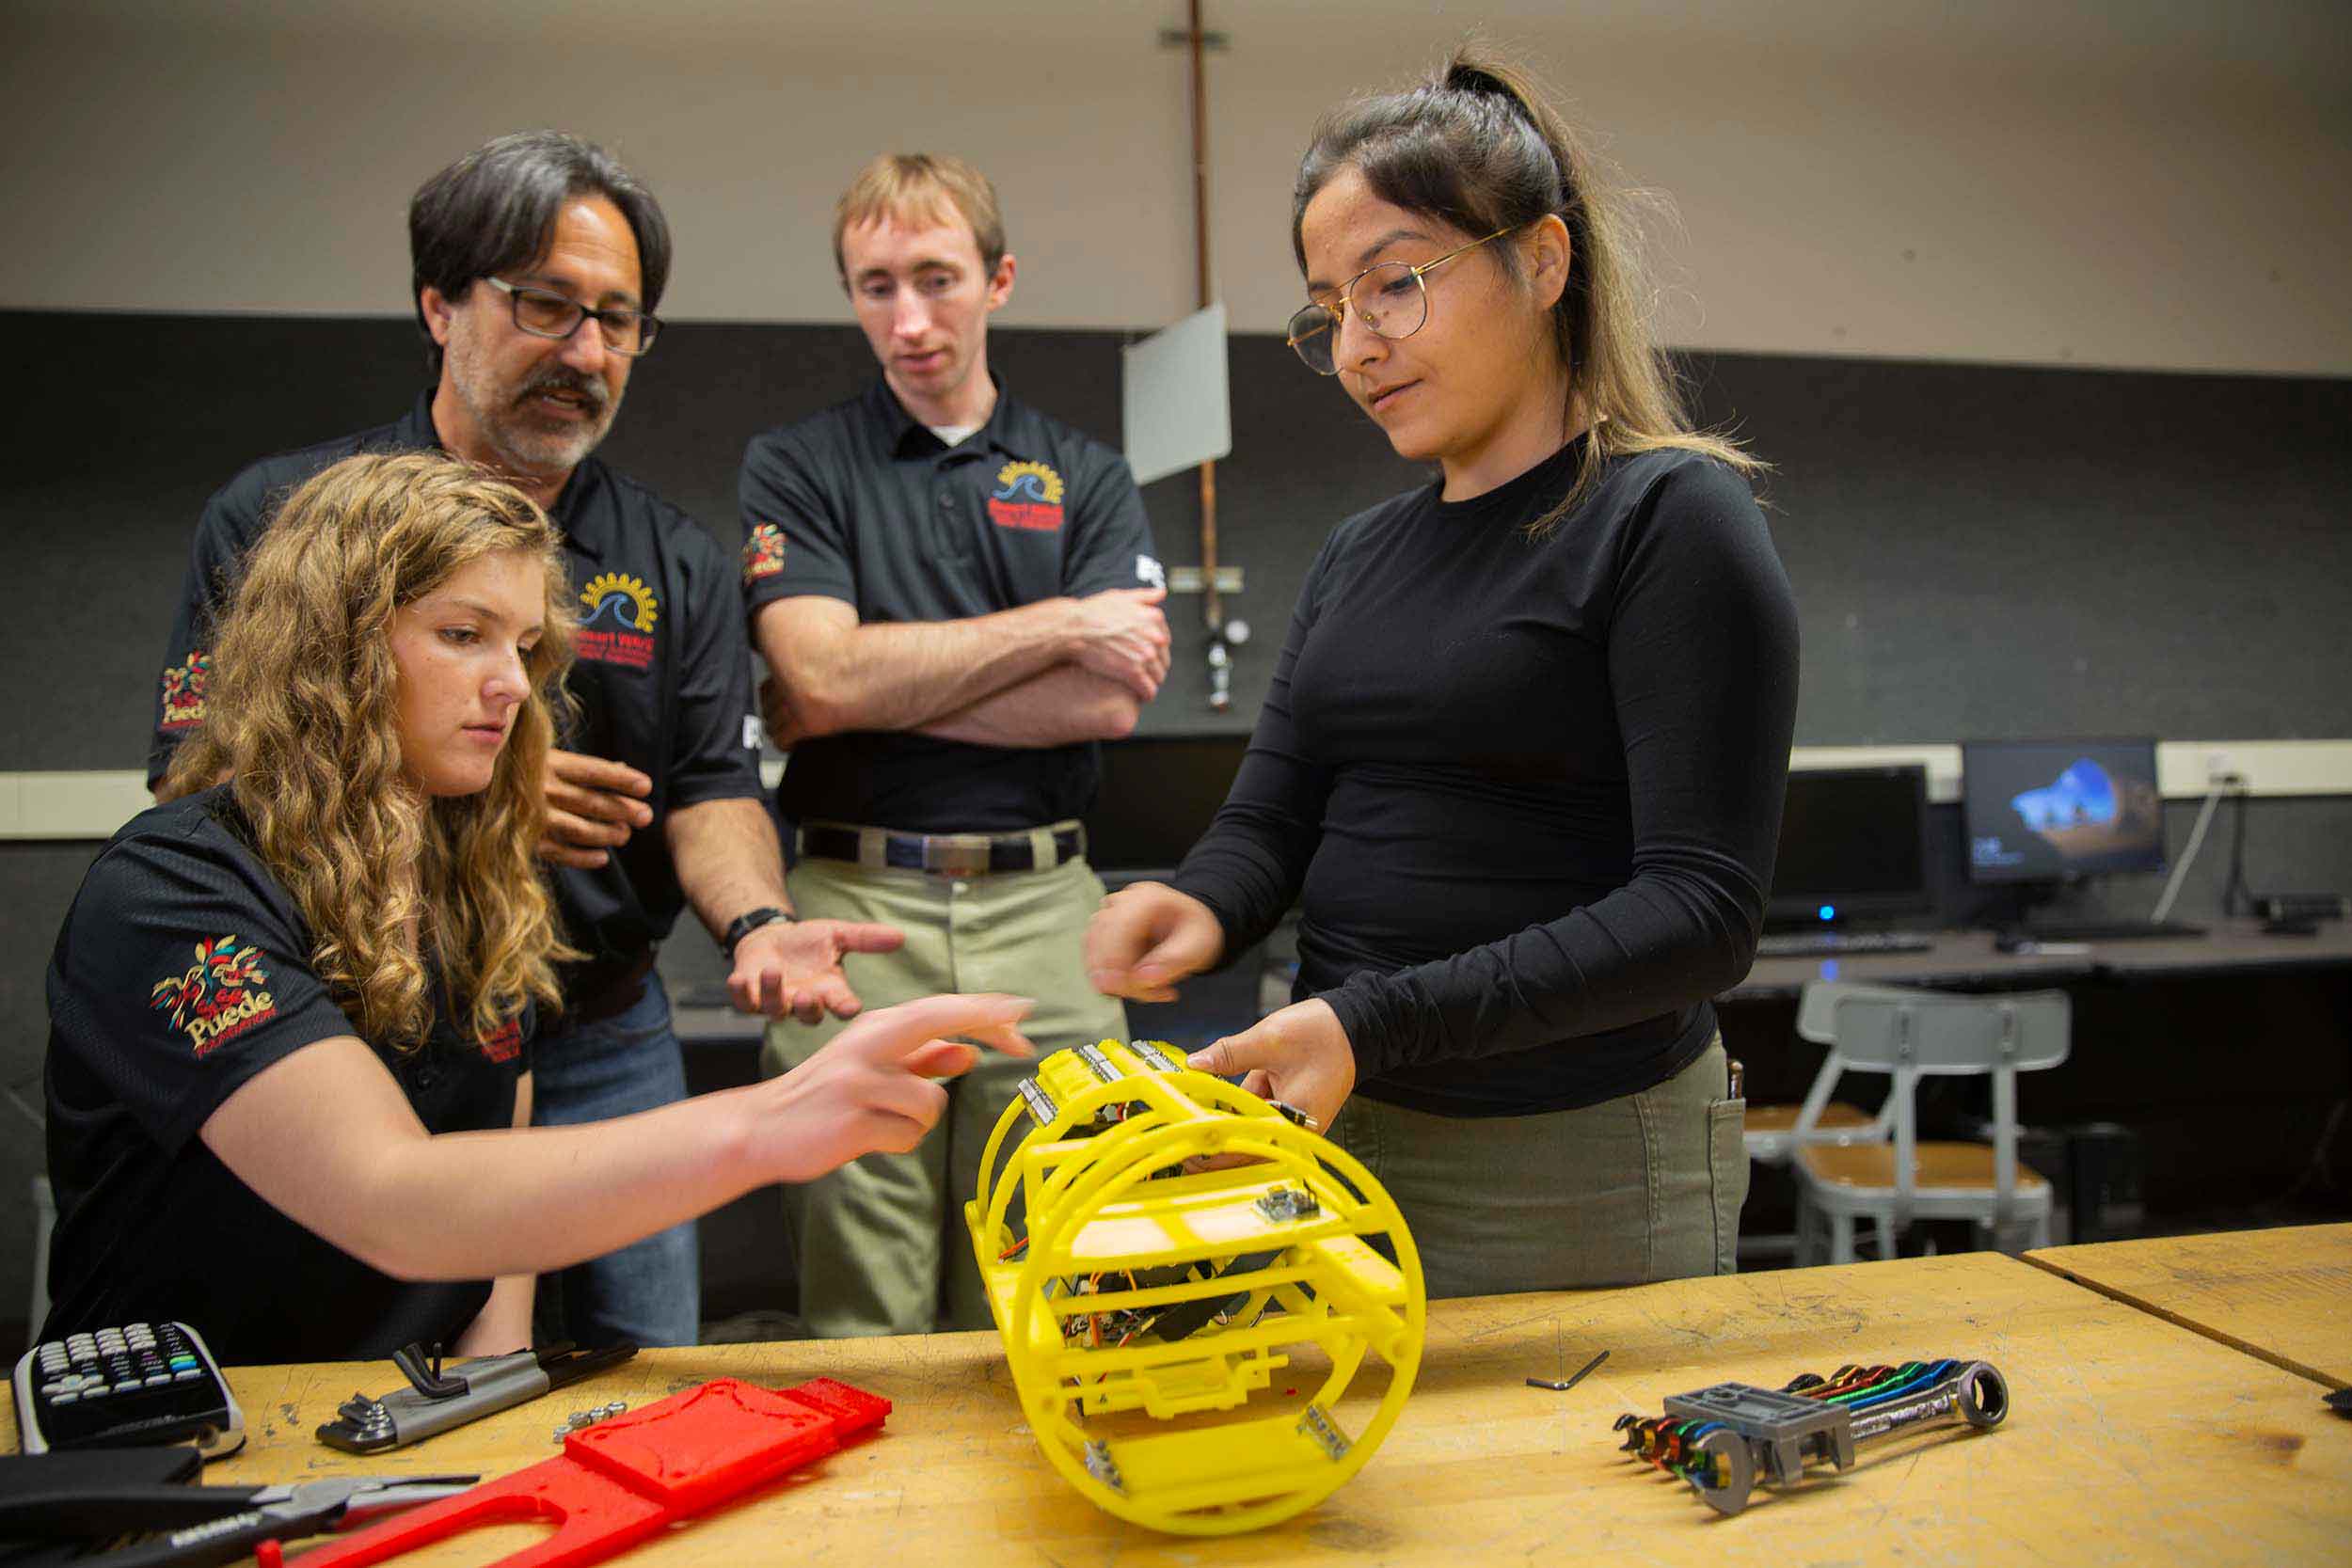 Two undergraduate members of the all-female Desert WAVE underwater robotics team work on their robot in a workshop with two mentors.